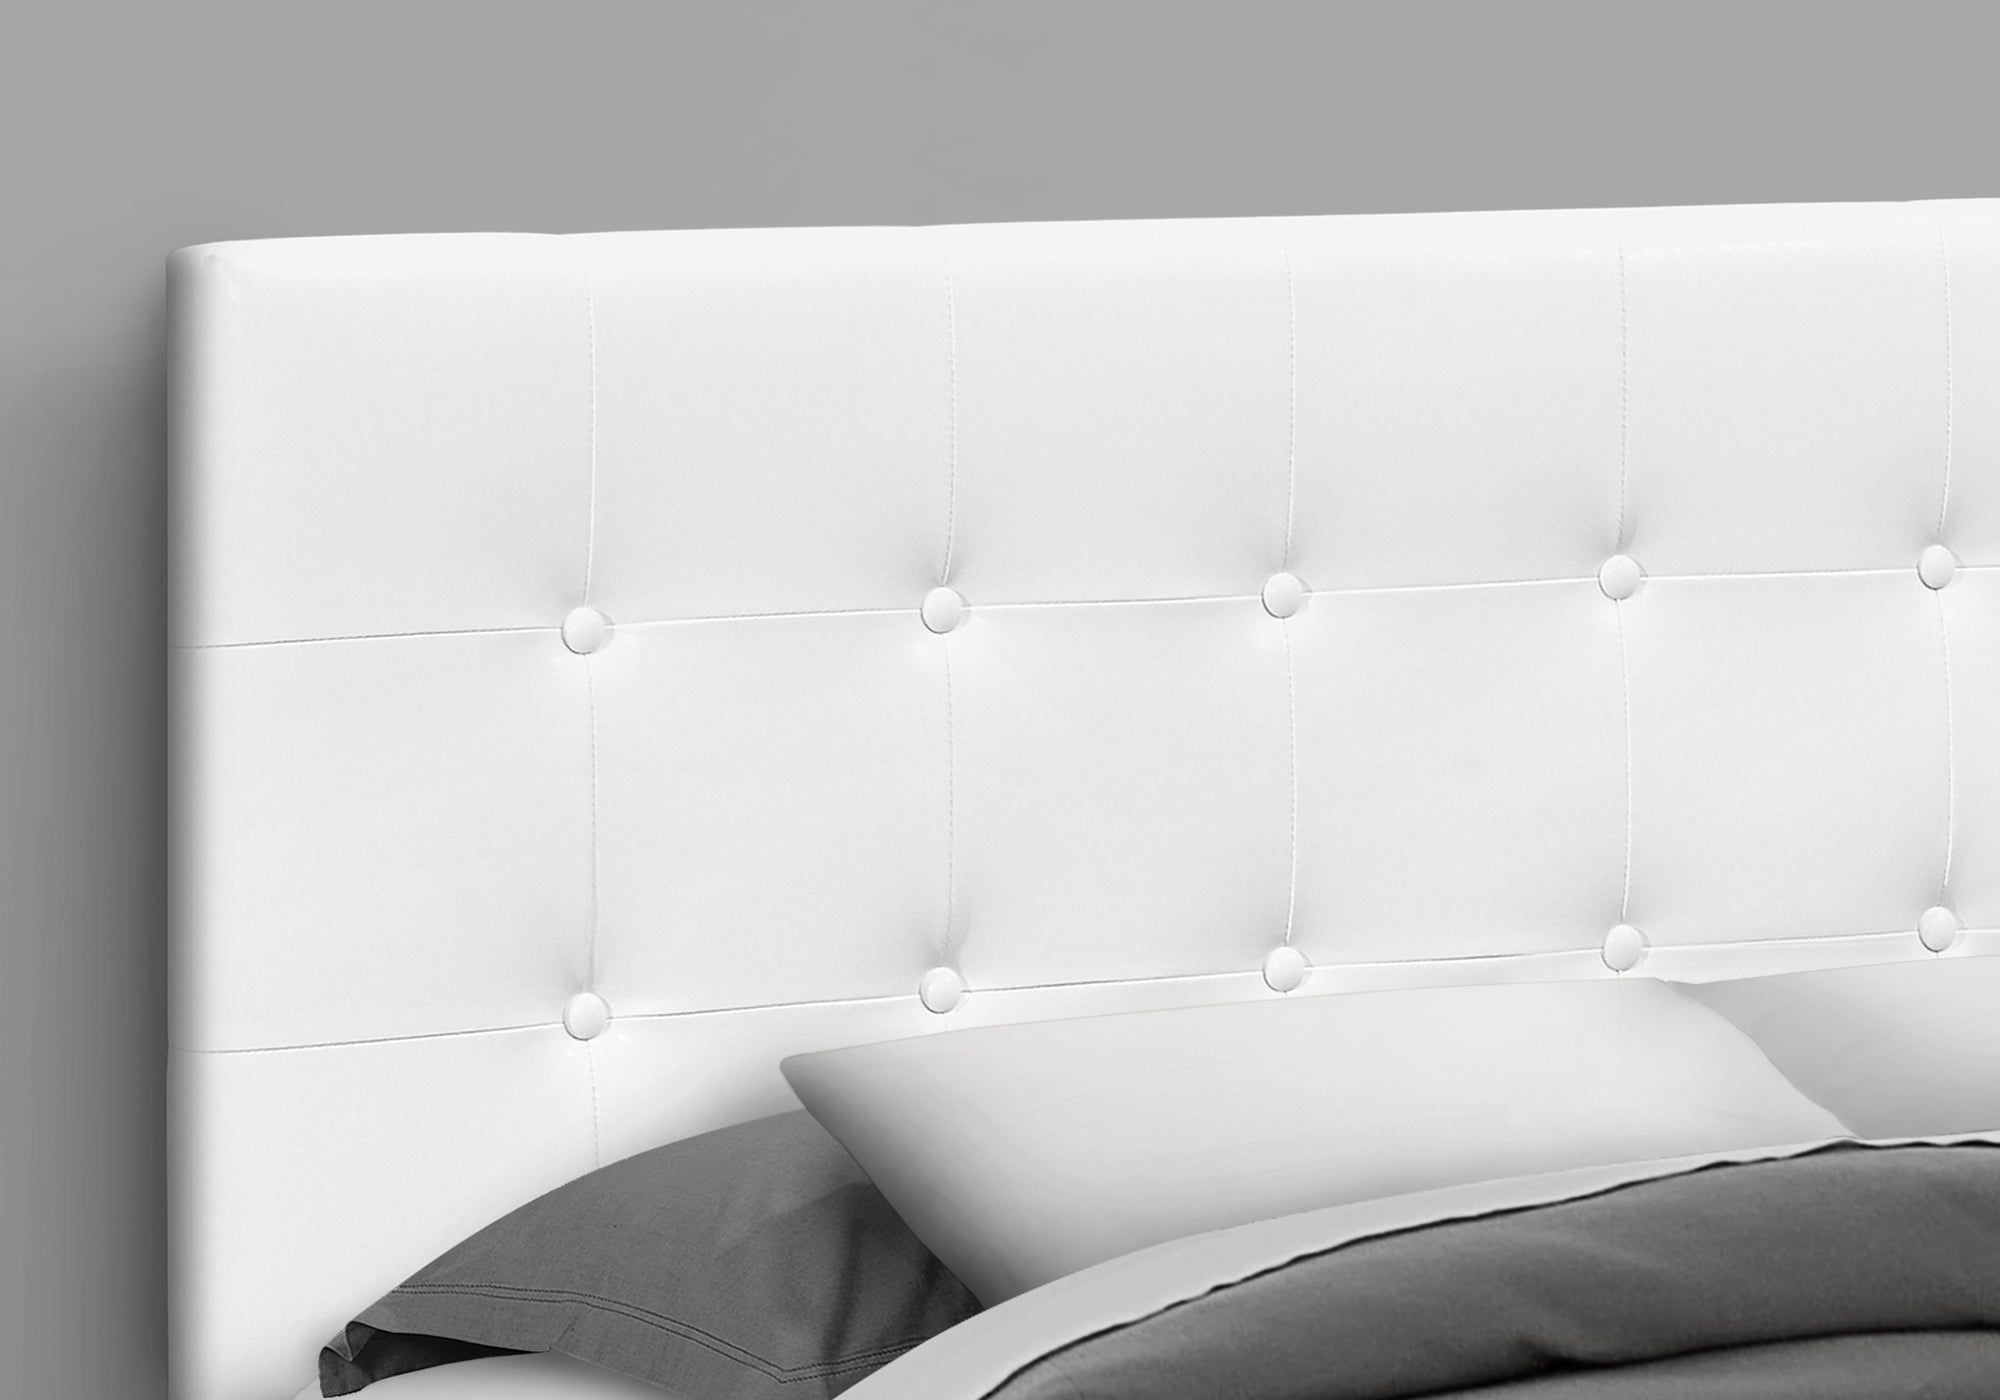 MN-406002Q    Headboard, Bedroom, Queen Size, Upholstered, Leather Look, Wooden Frame, White, Black, Contemporary, Modern